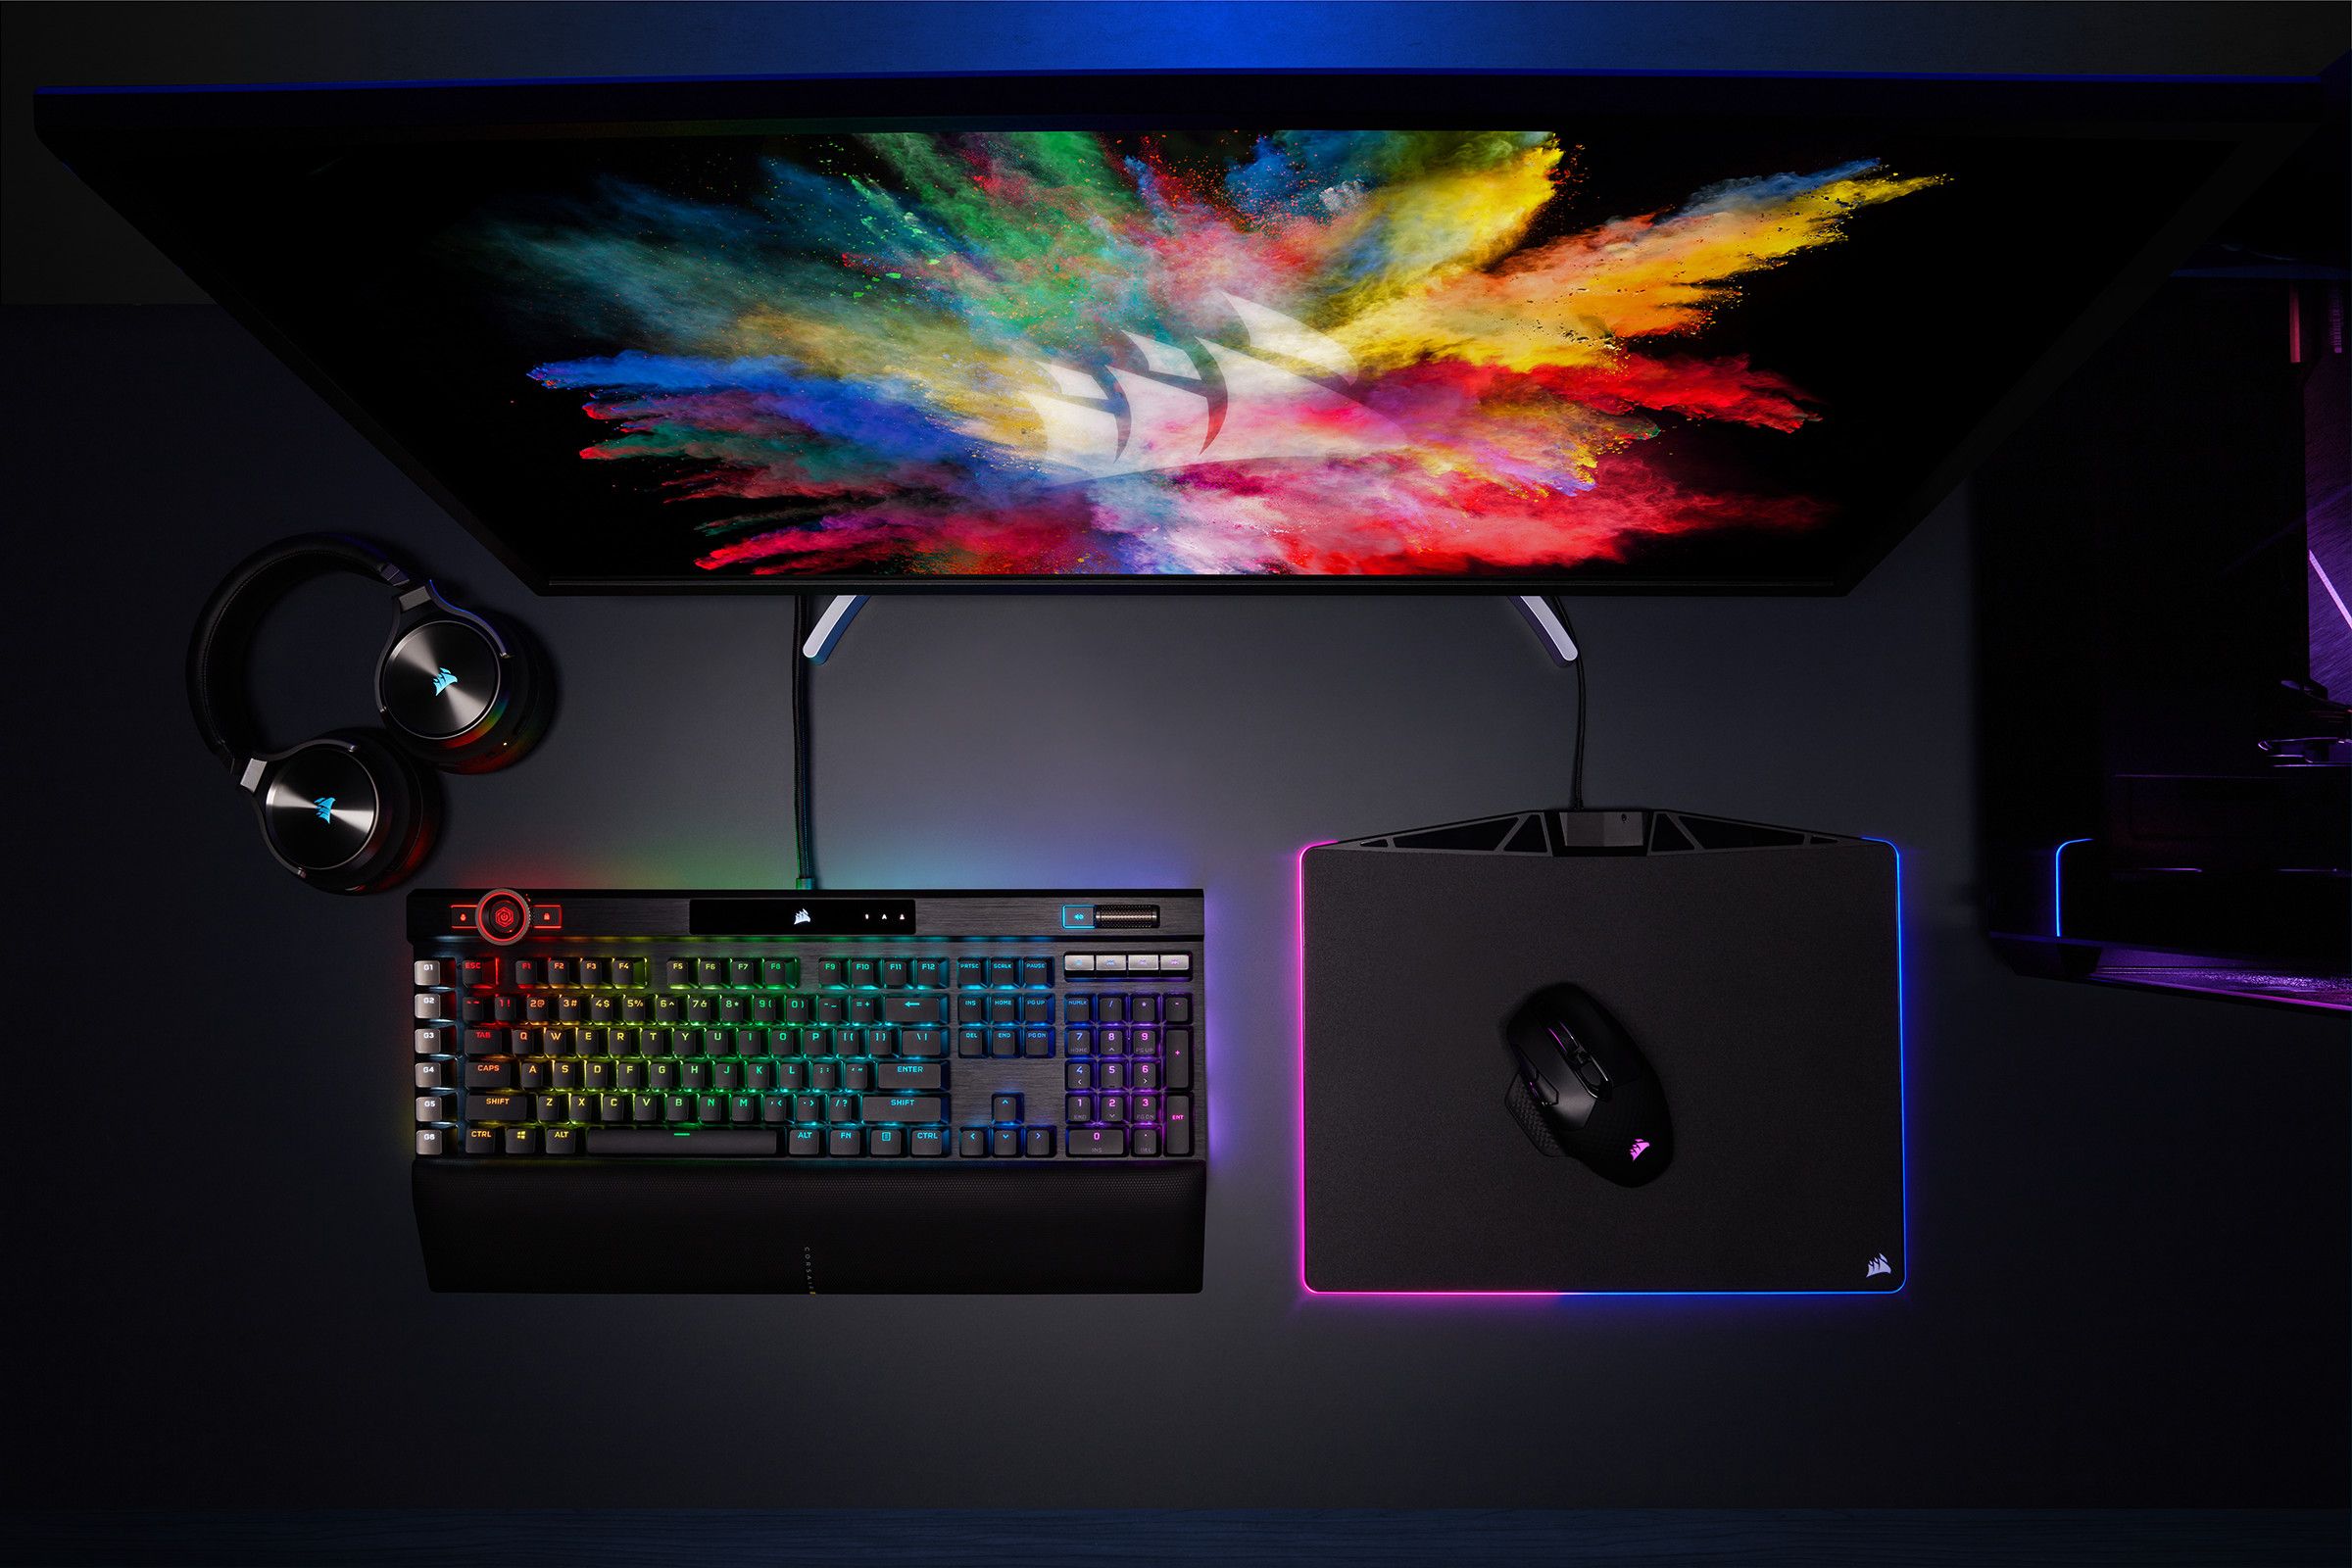 Corsair K100 Rgb Keyboard Review The Brightest The Fastest The Best Uggpascherfo Com